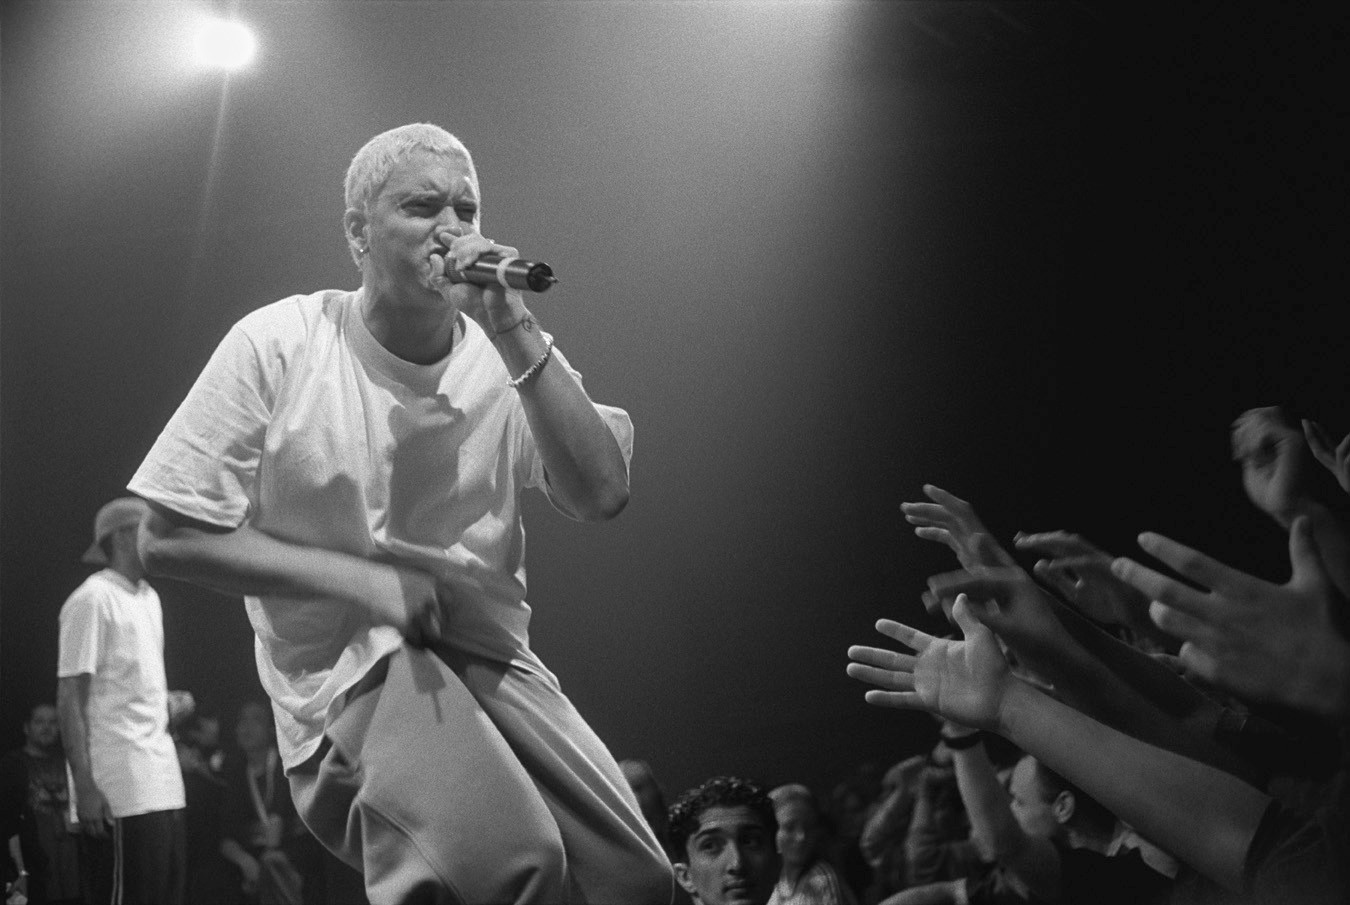 Eminem performing enthusiastically in Germany